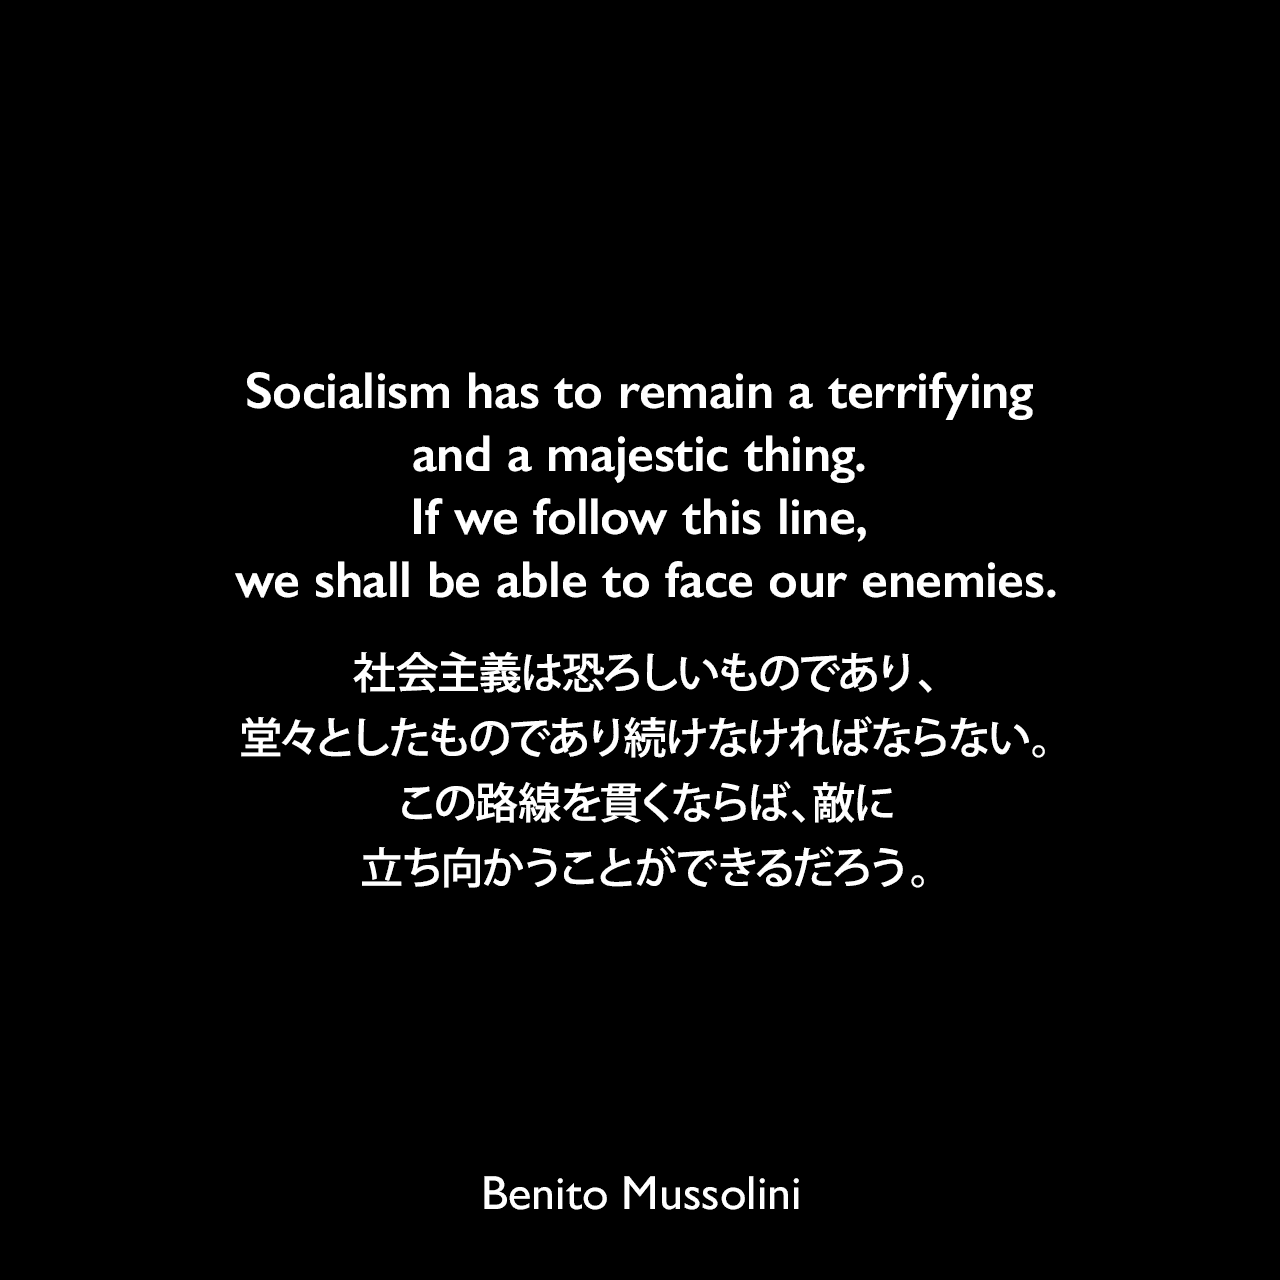 Socialism has to remain a terrifying and a majestic thing. If we follow this line, we shall be able to face our enemies.社会主義は恐ろしいものであり、堂々としたものであり続けなければならない。この路線を貫くならば、敵に立ち向かうことができるだろう。-「Il Duce: The Life and Work of Benito Mussolini」よりBenito Mussolini